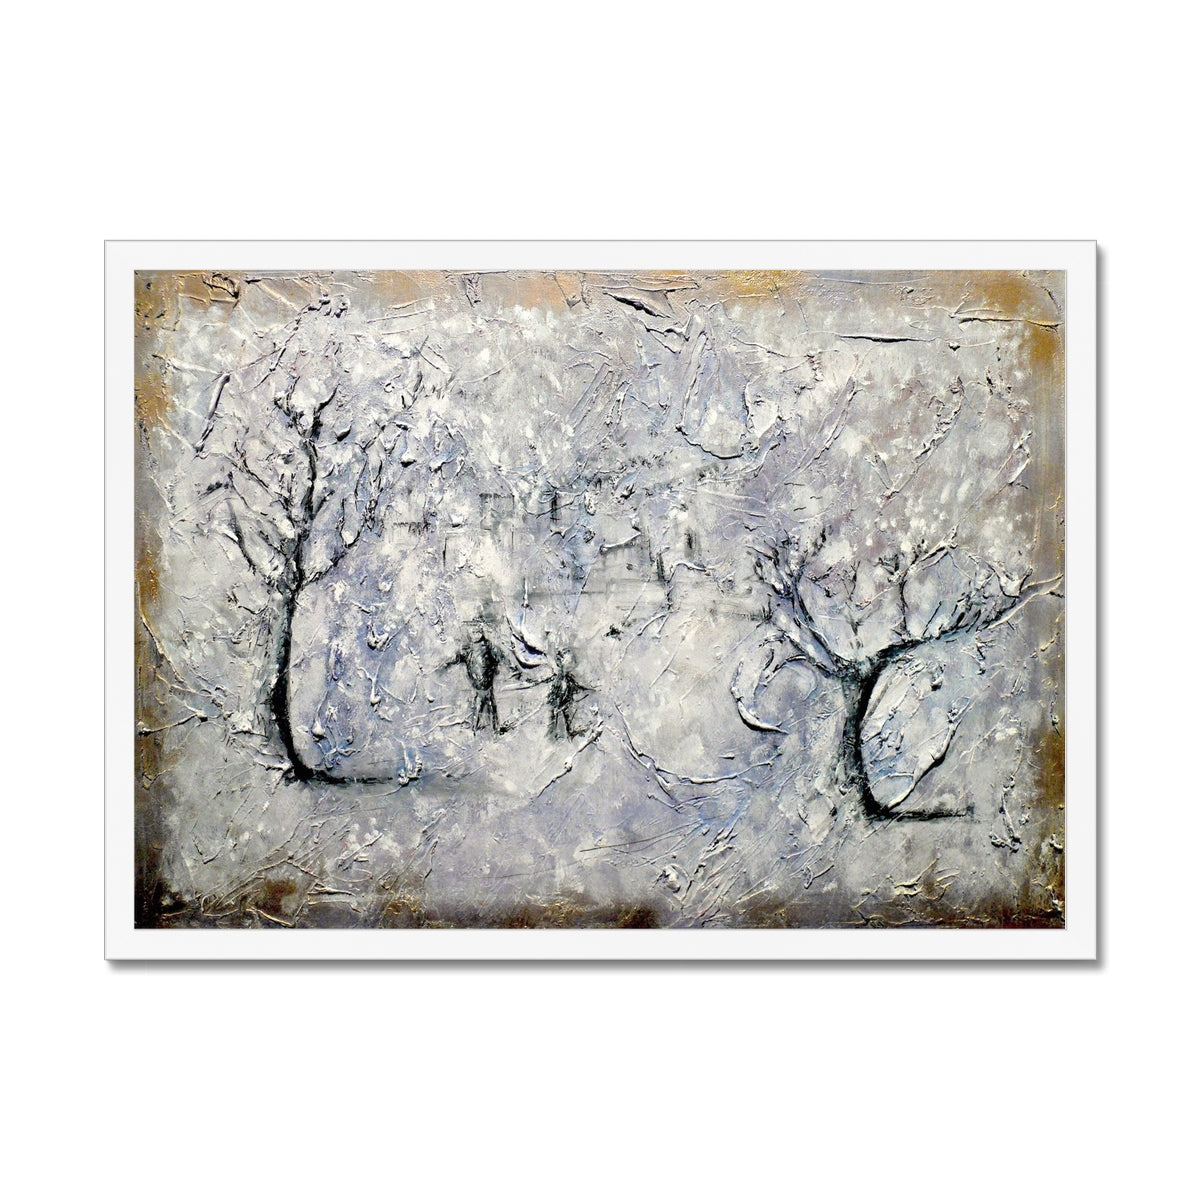 Father Daughter Snow Painting | Framed Prints From Scotland-Framed Prints-Abstract & Impressionistic Art Gallery-A2 Landscape-White Frame-Paintings, Prints, Homeware, Art Gifts From Scotland By Scottish Artist Kevin Hunter